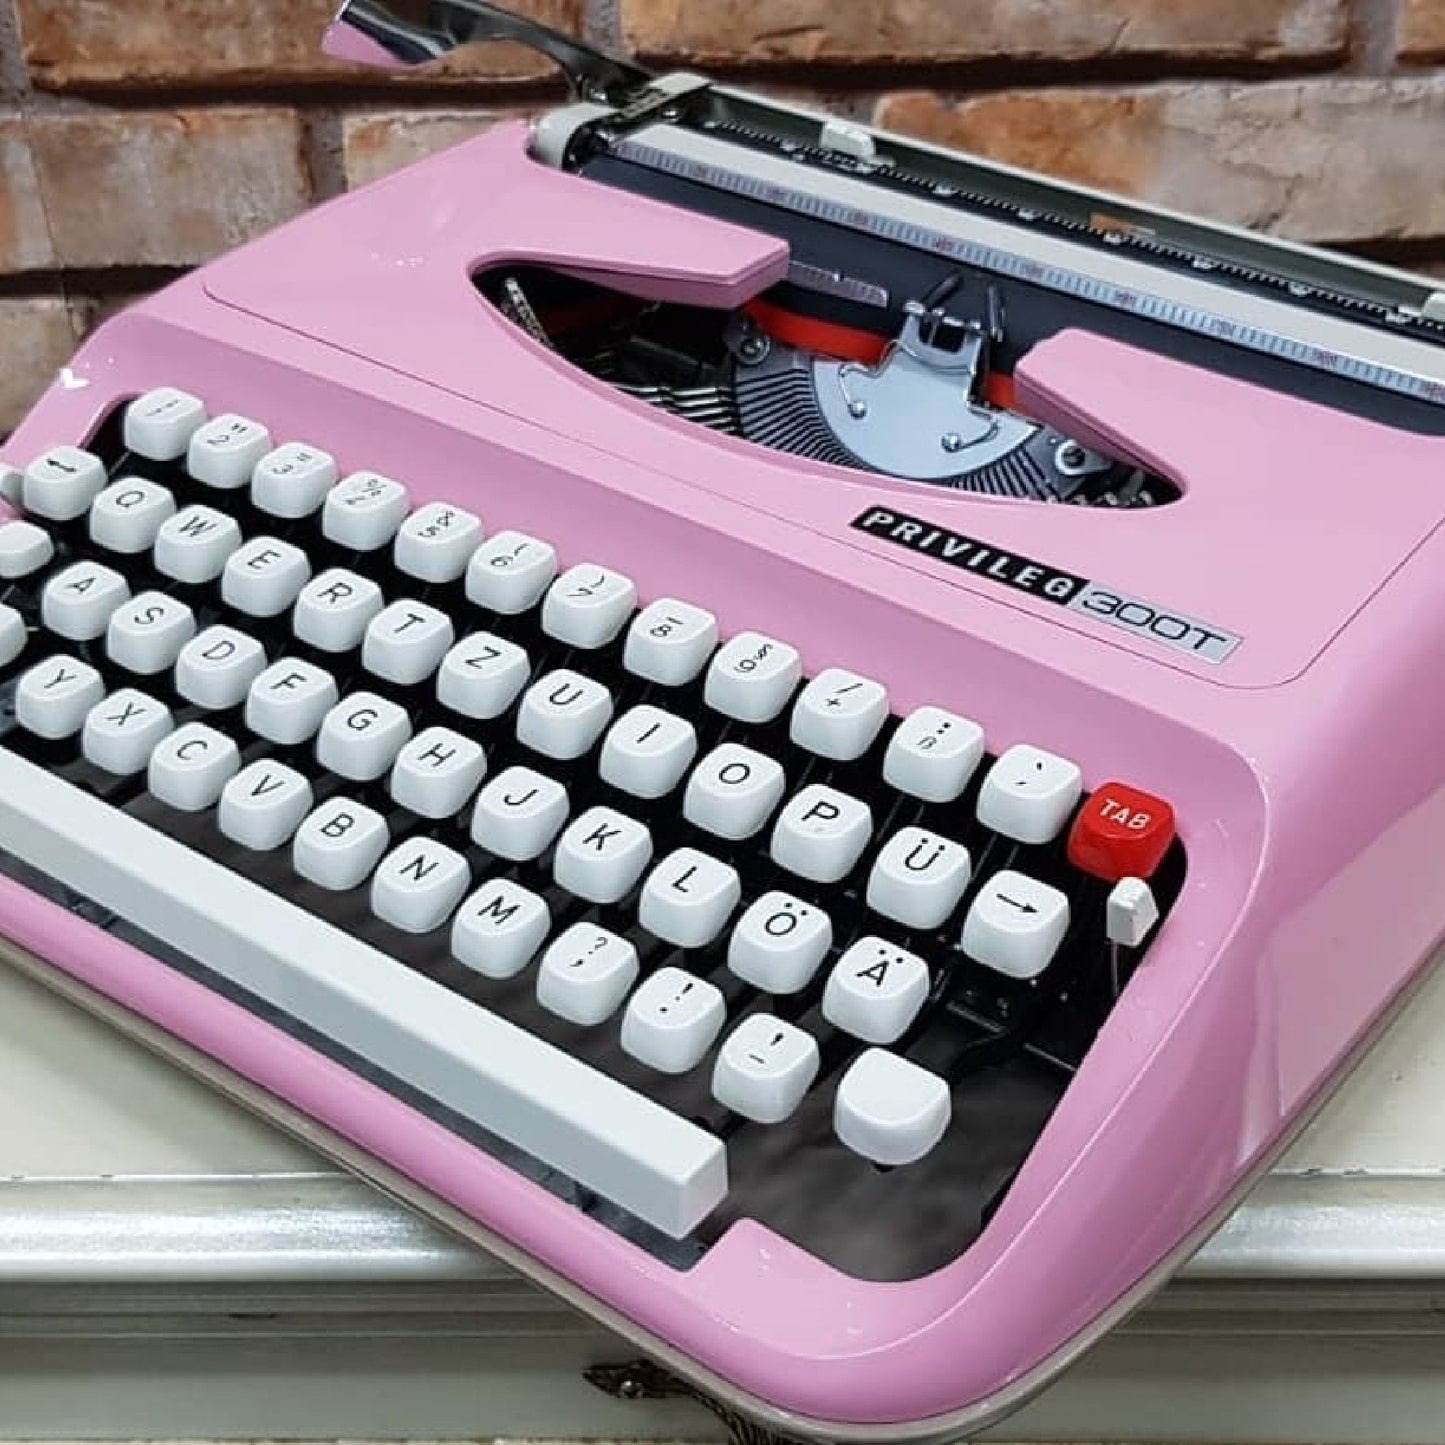 PRIVILEG 300T Typewriter,Charming Pink Hue,1960 Model,Vintage Elegance with Modern Typing Precision | Ideal for Timeless Writing Experiences